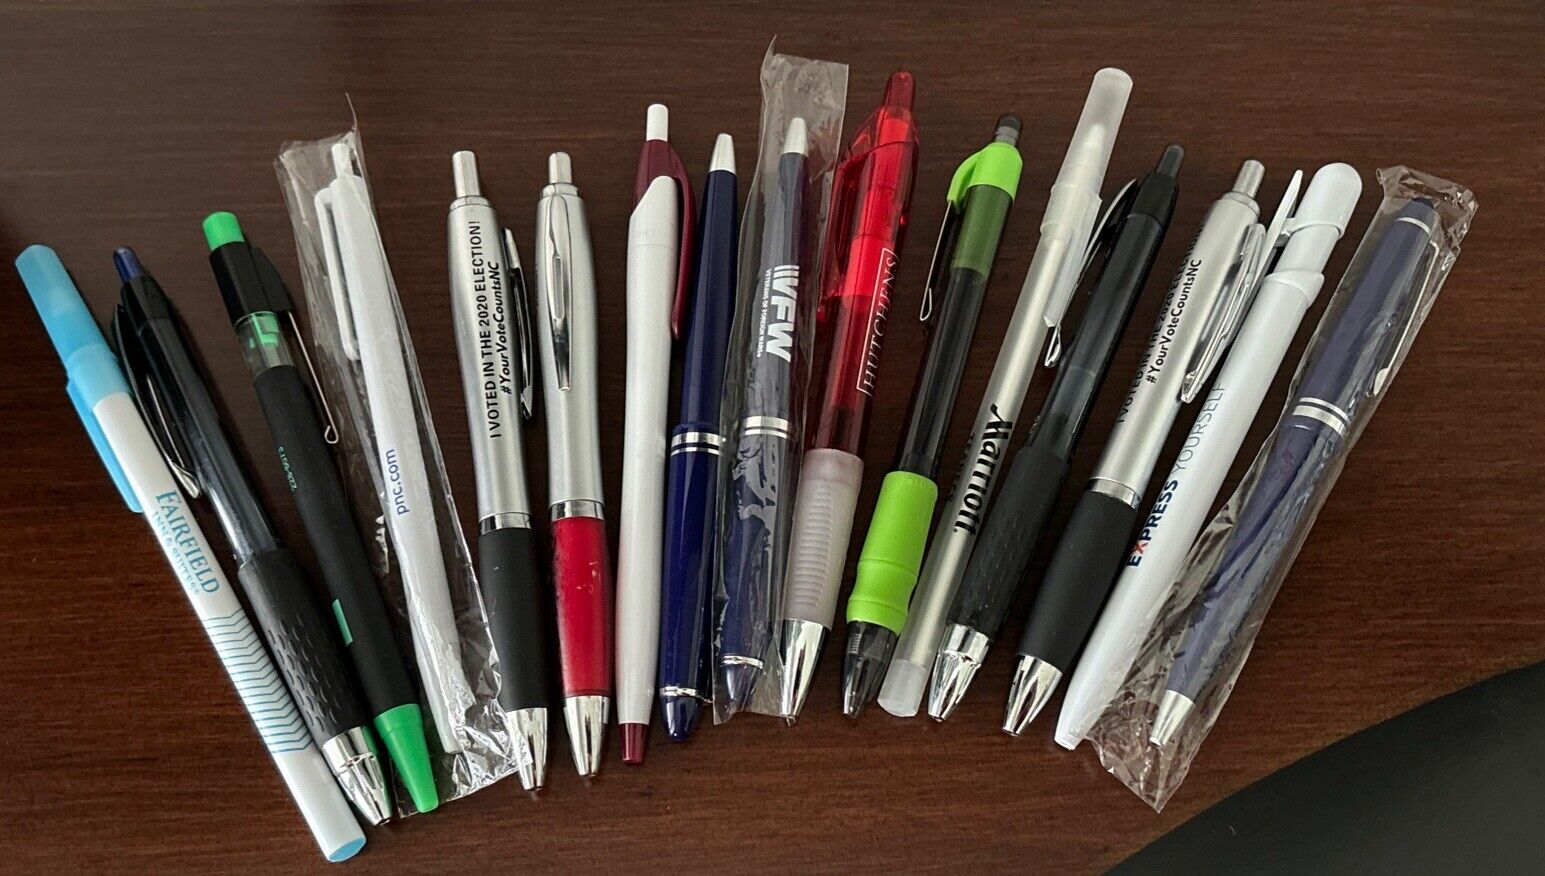 Mixed Lot of 16 PENS Ball Point Pens Advertising Promo - Black Blue